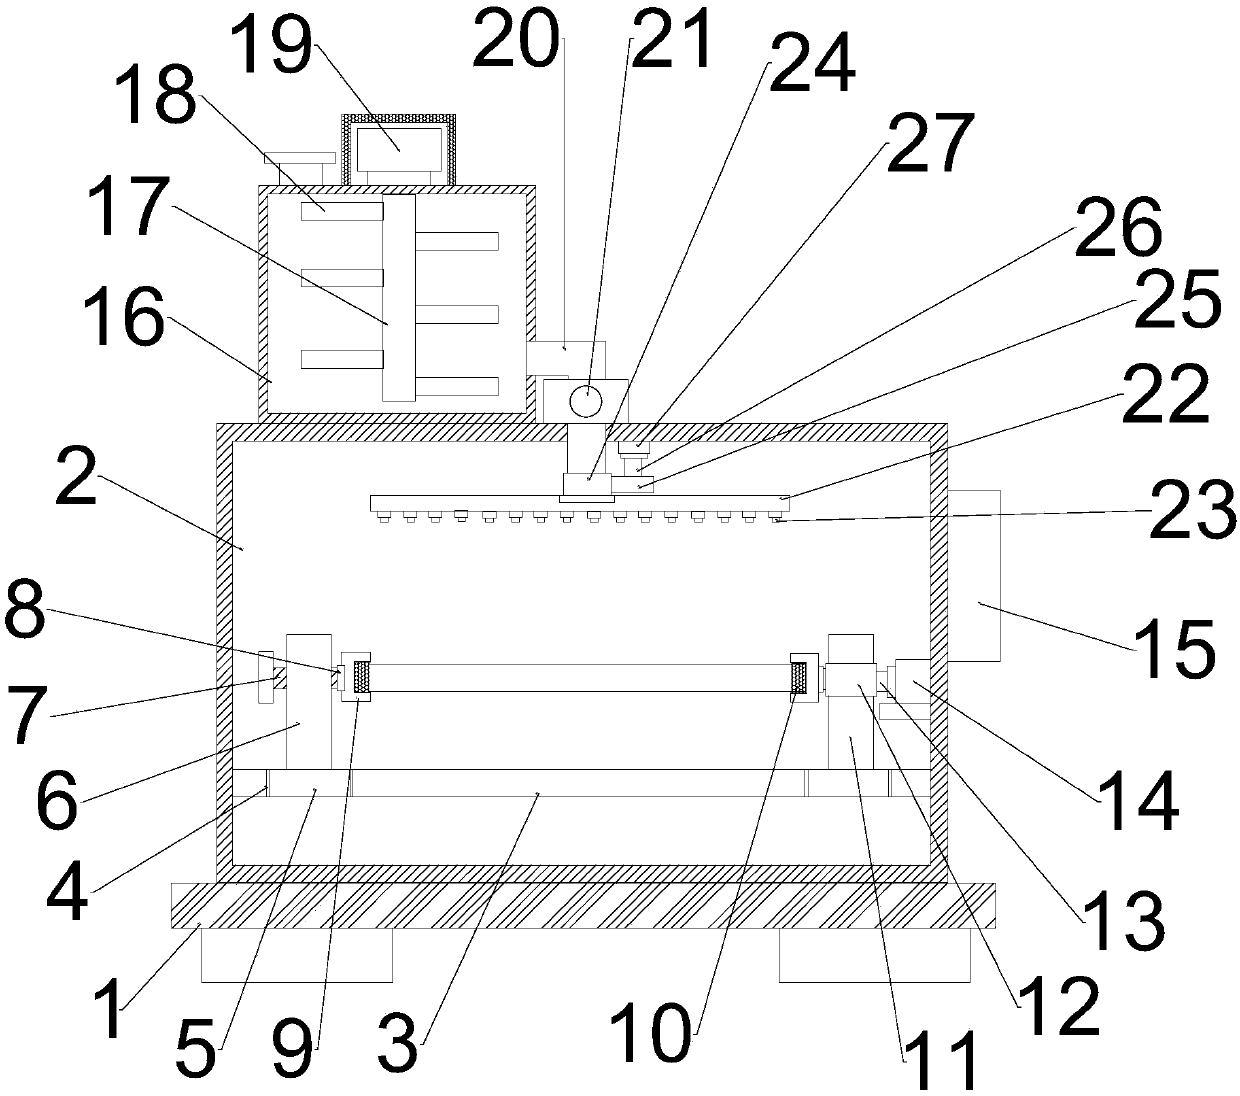 Wooden door processing device with rotational double-side paint spraying function